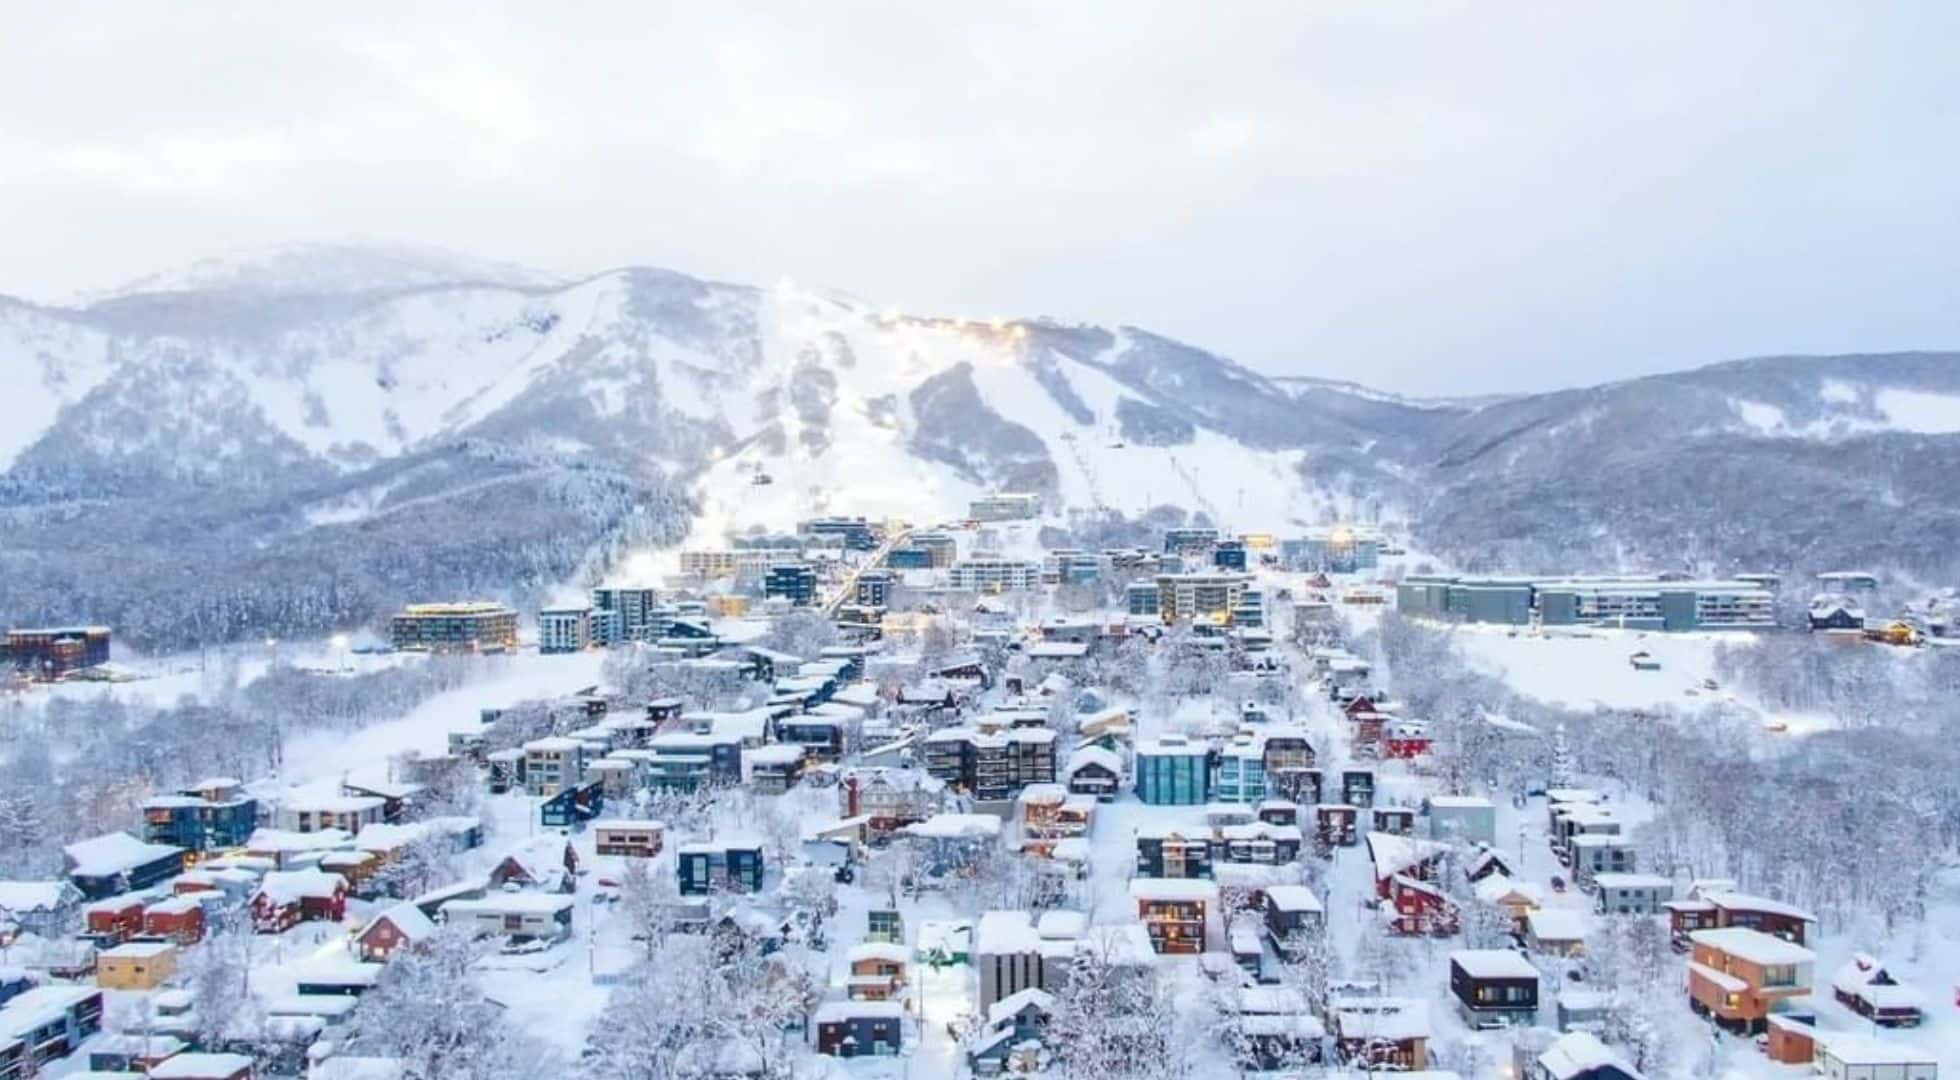 Niseko Japan is a renowned ski area with a vibrant nightlife